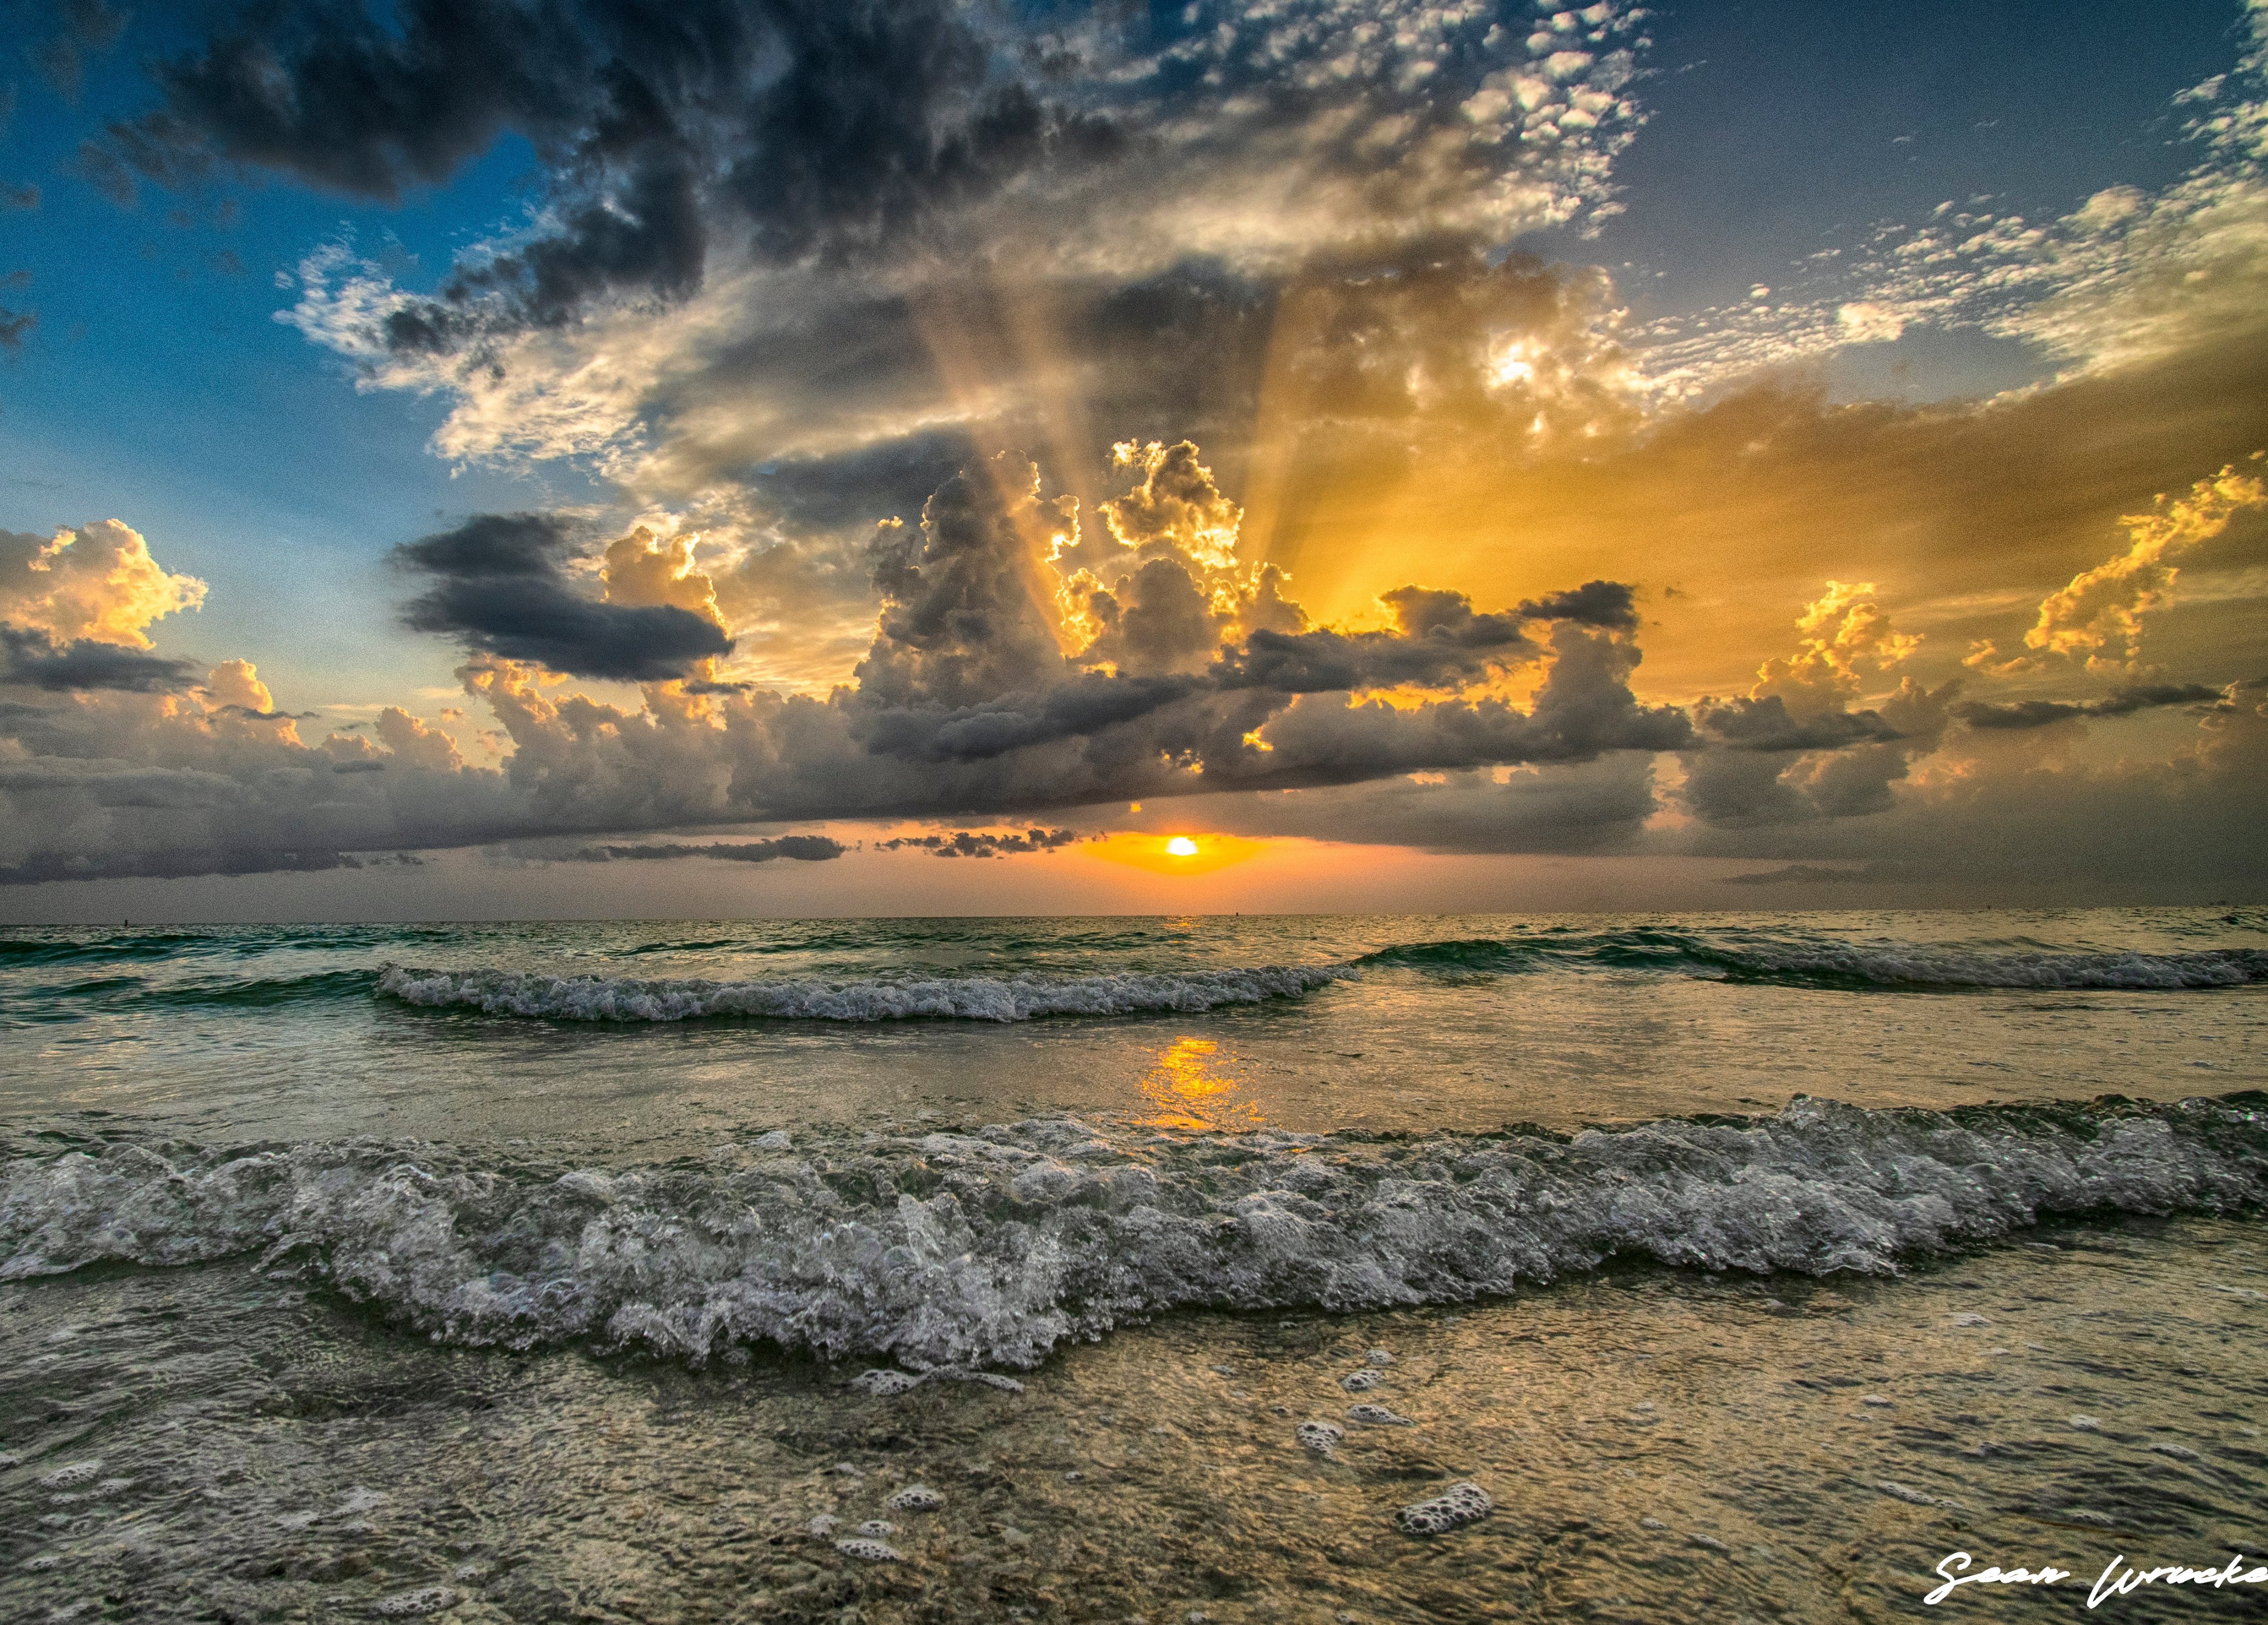 1st Place Sunset over the Gulf of Mexico by Sean Wrucke @Sean__01